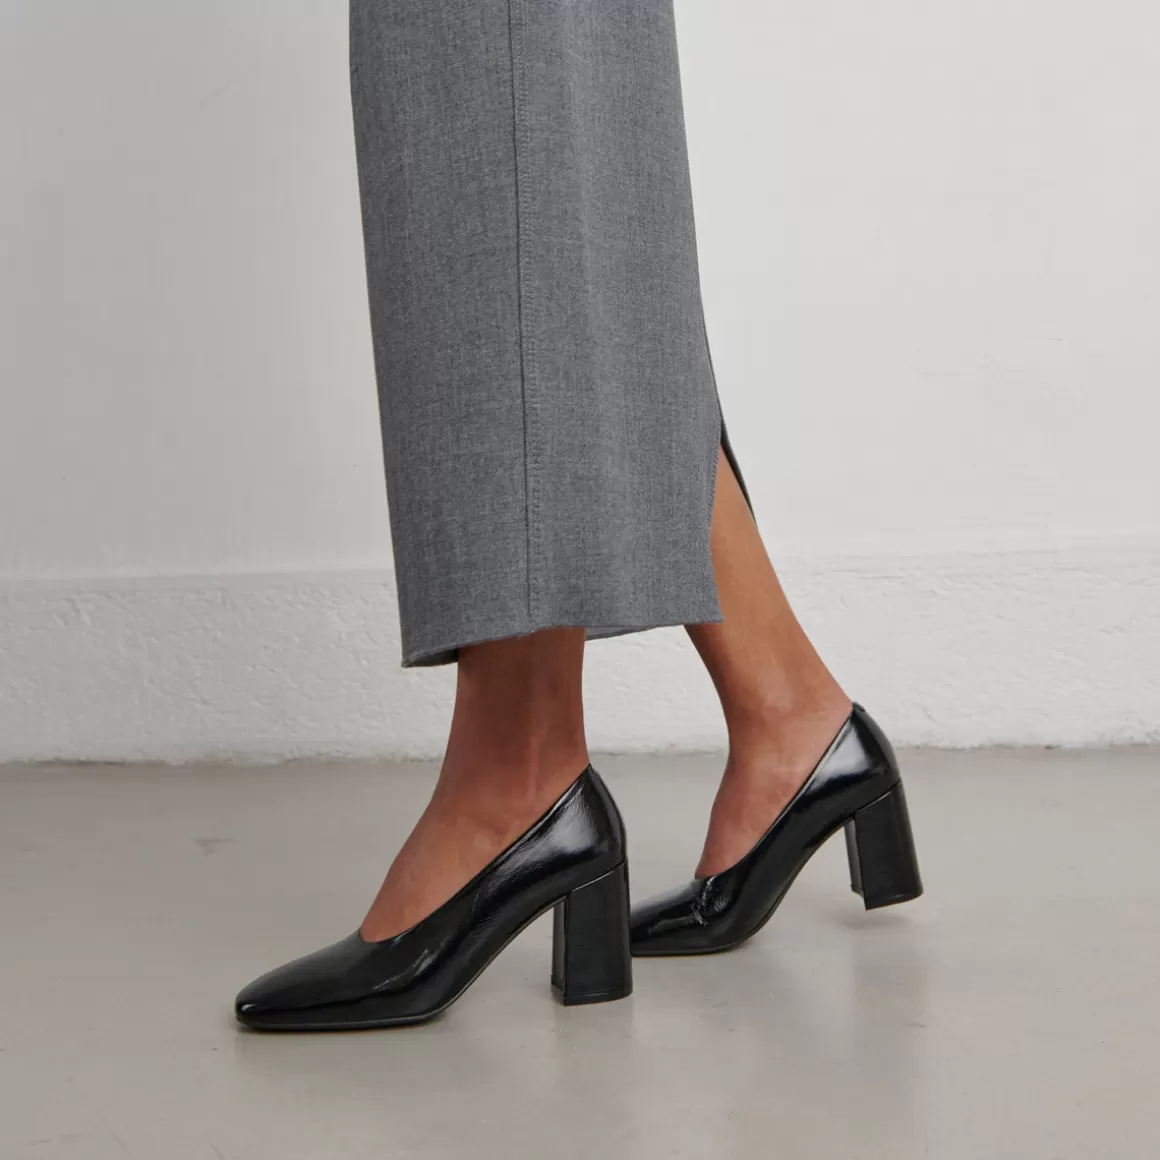 Pointed-toe pumps<Jonak New